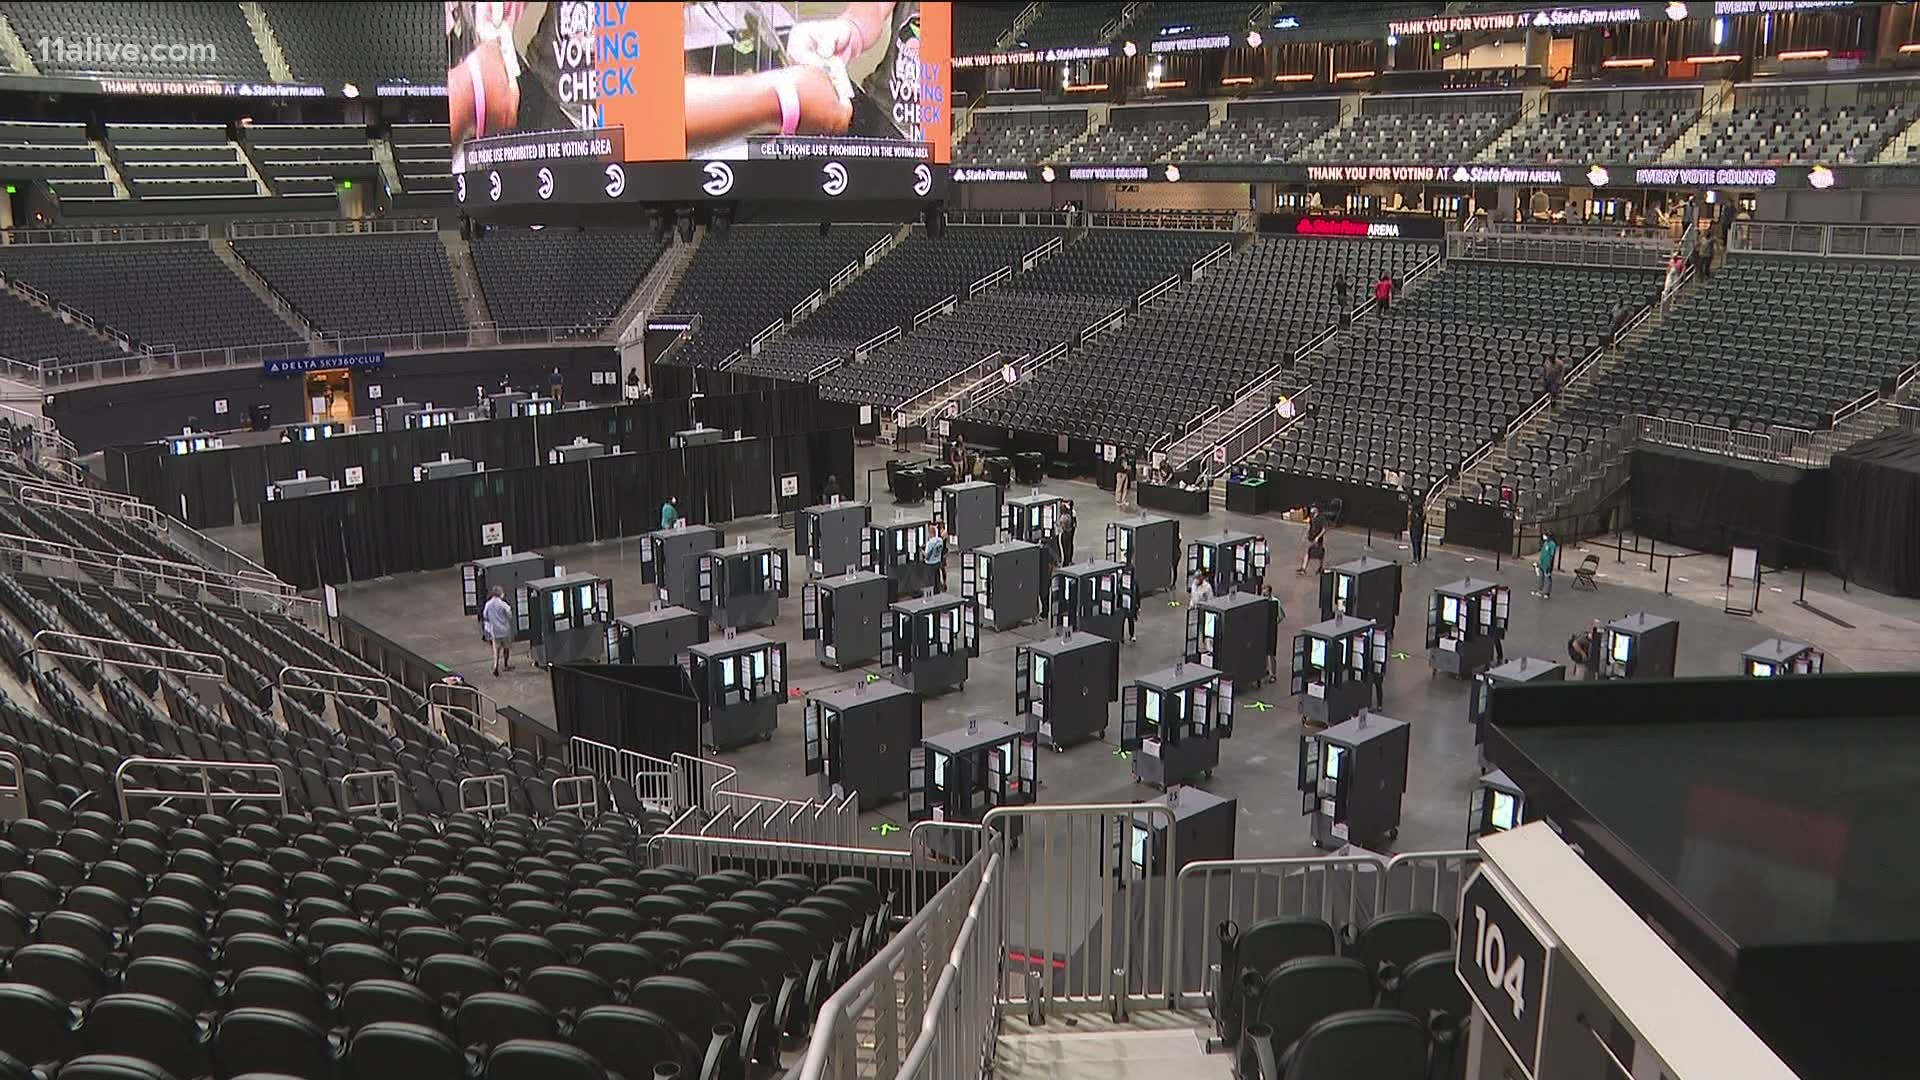 There are 300 voting machines there, and more than 200 Atlanta Hawks employees to assist.